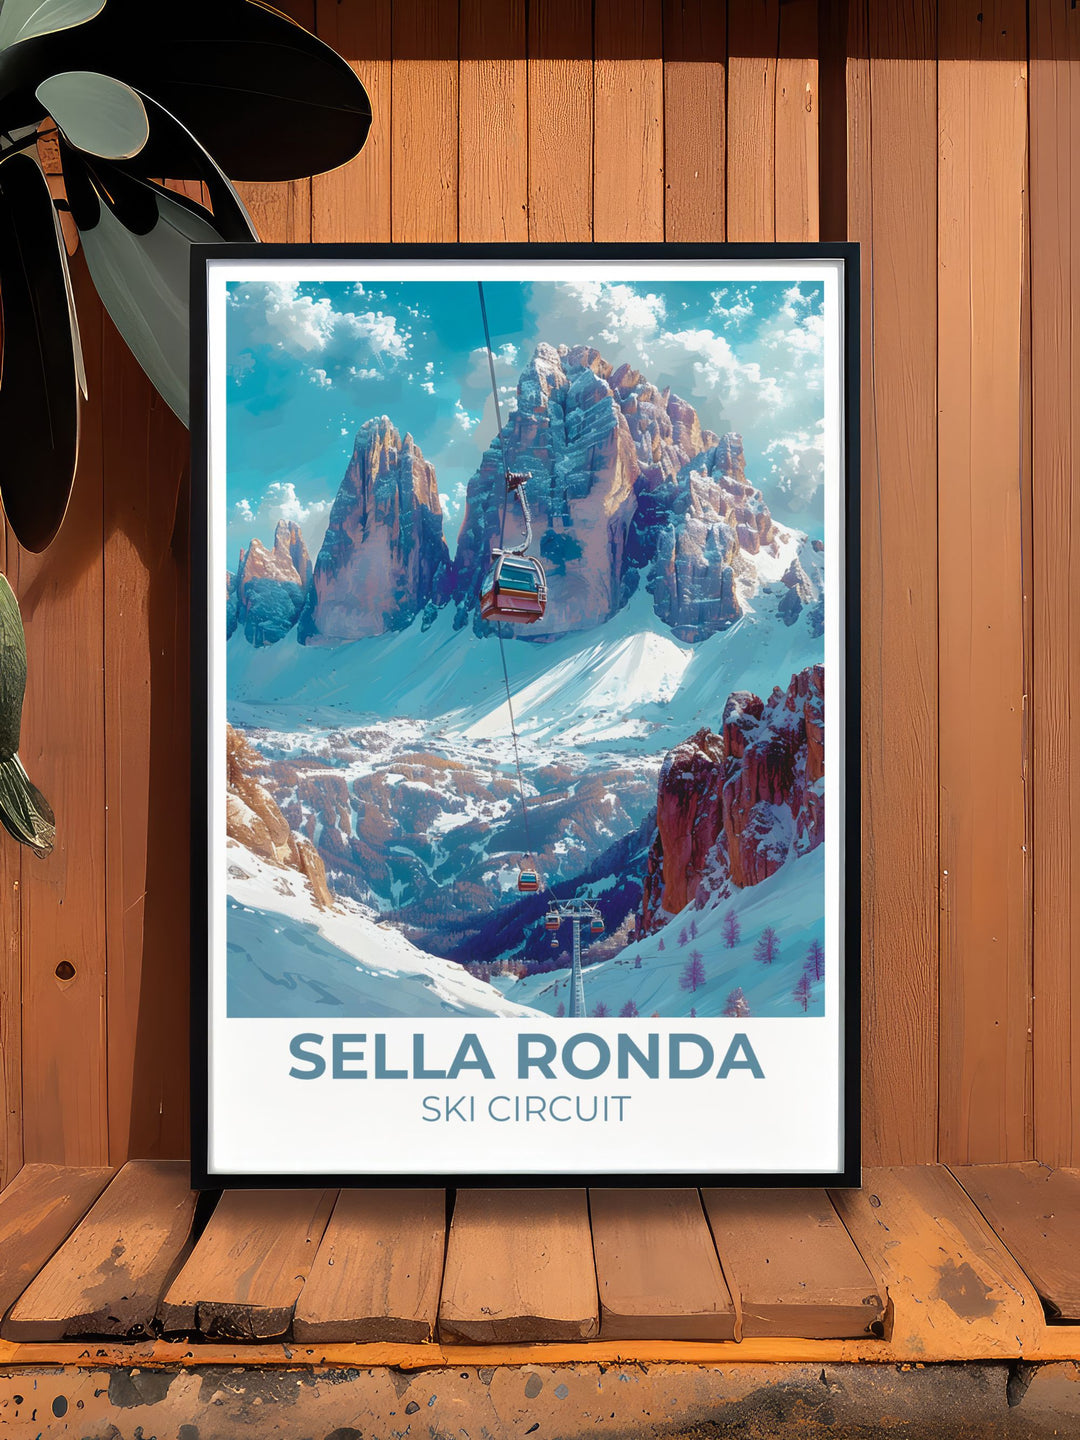 Elegant Sella Ronda Ski Circuit Wall Art featuring the Dolomites, bringing the thrill and beauty of the Italian Alps into your living space.